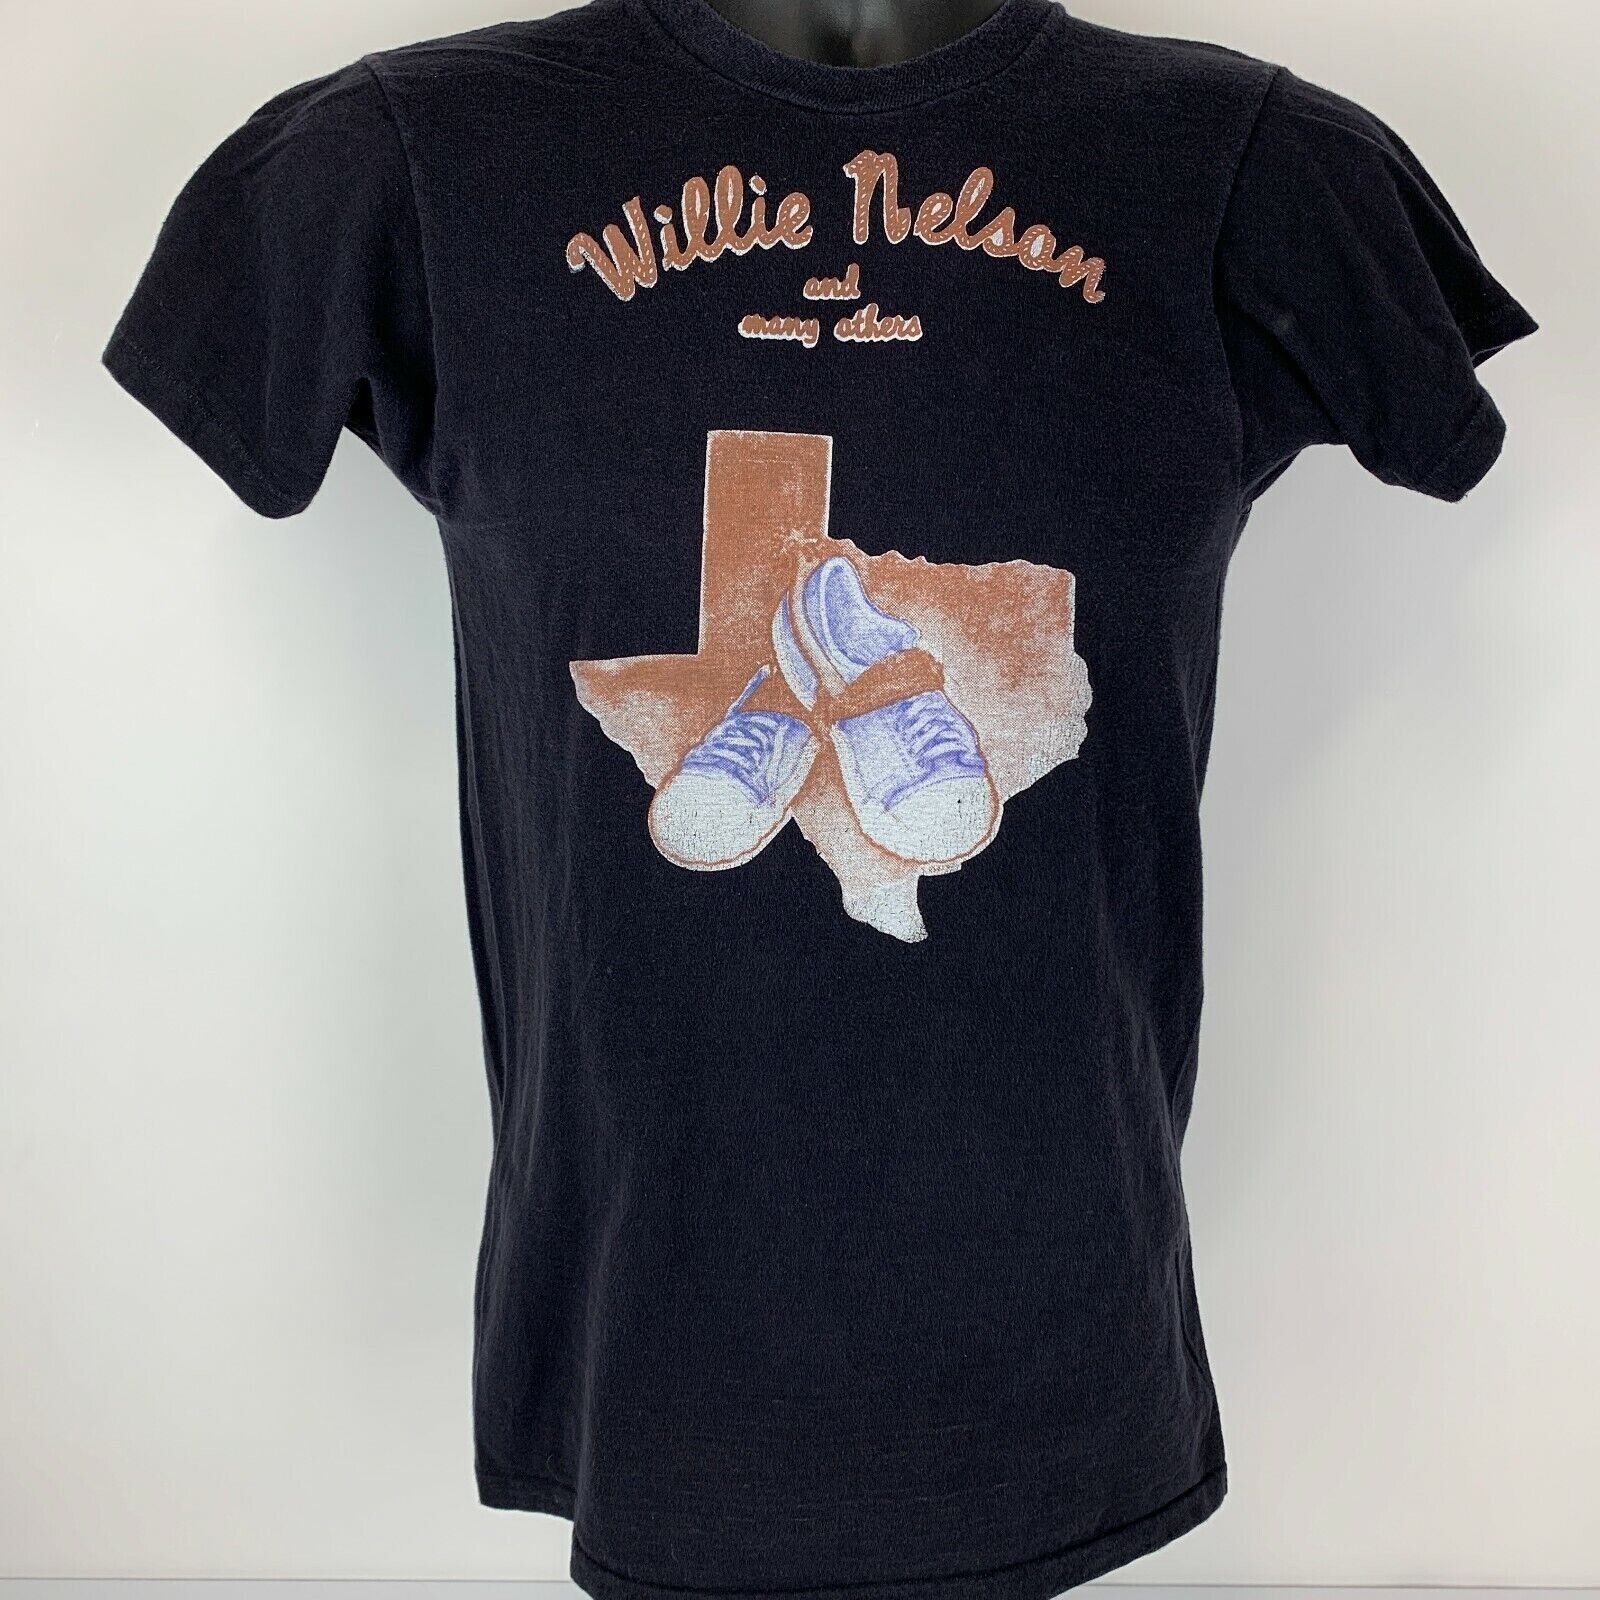 Vintage Willie Nelson Lone Star Beer Vintage 70s T Shirt Small 1974 Size US S / EU 44-46 / 1 - 2 Preview